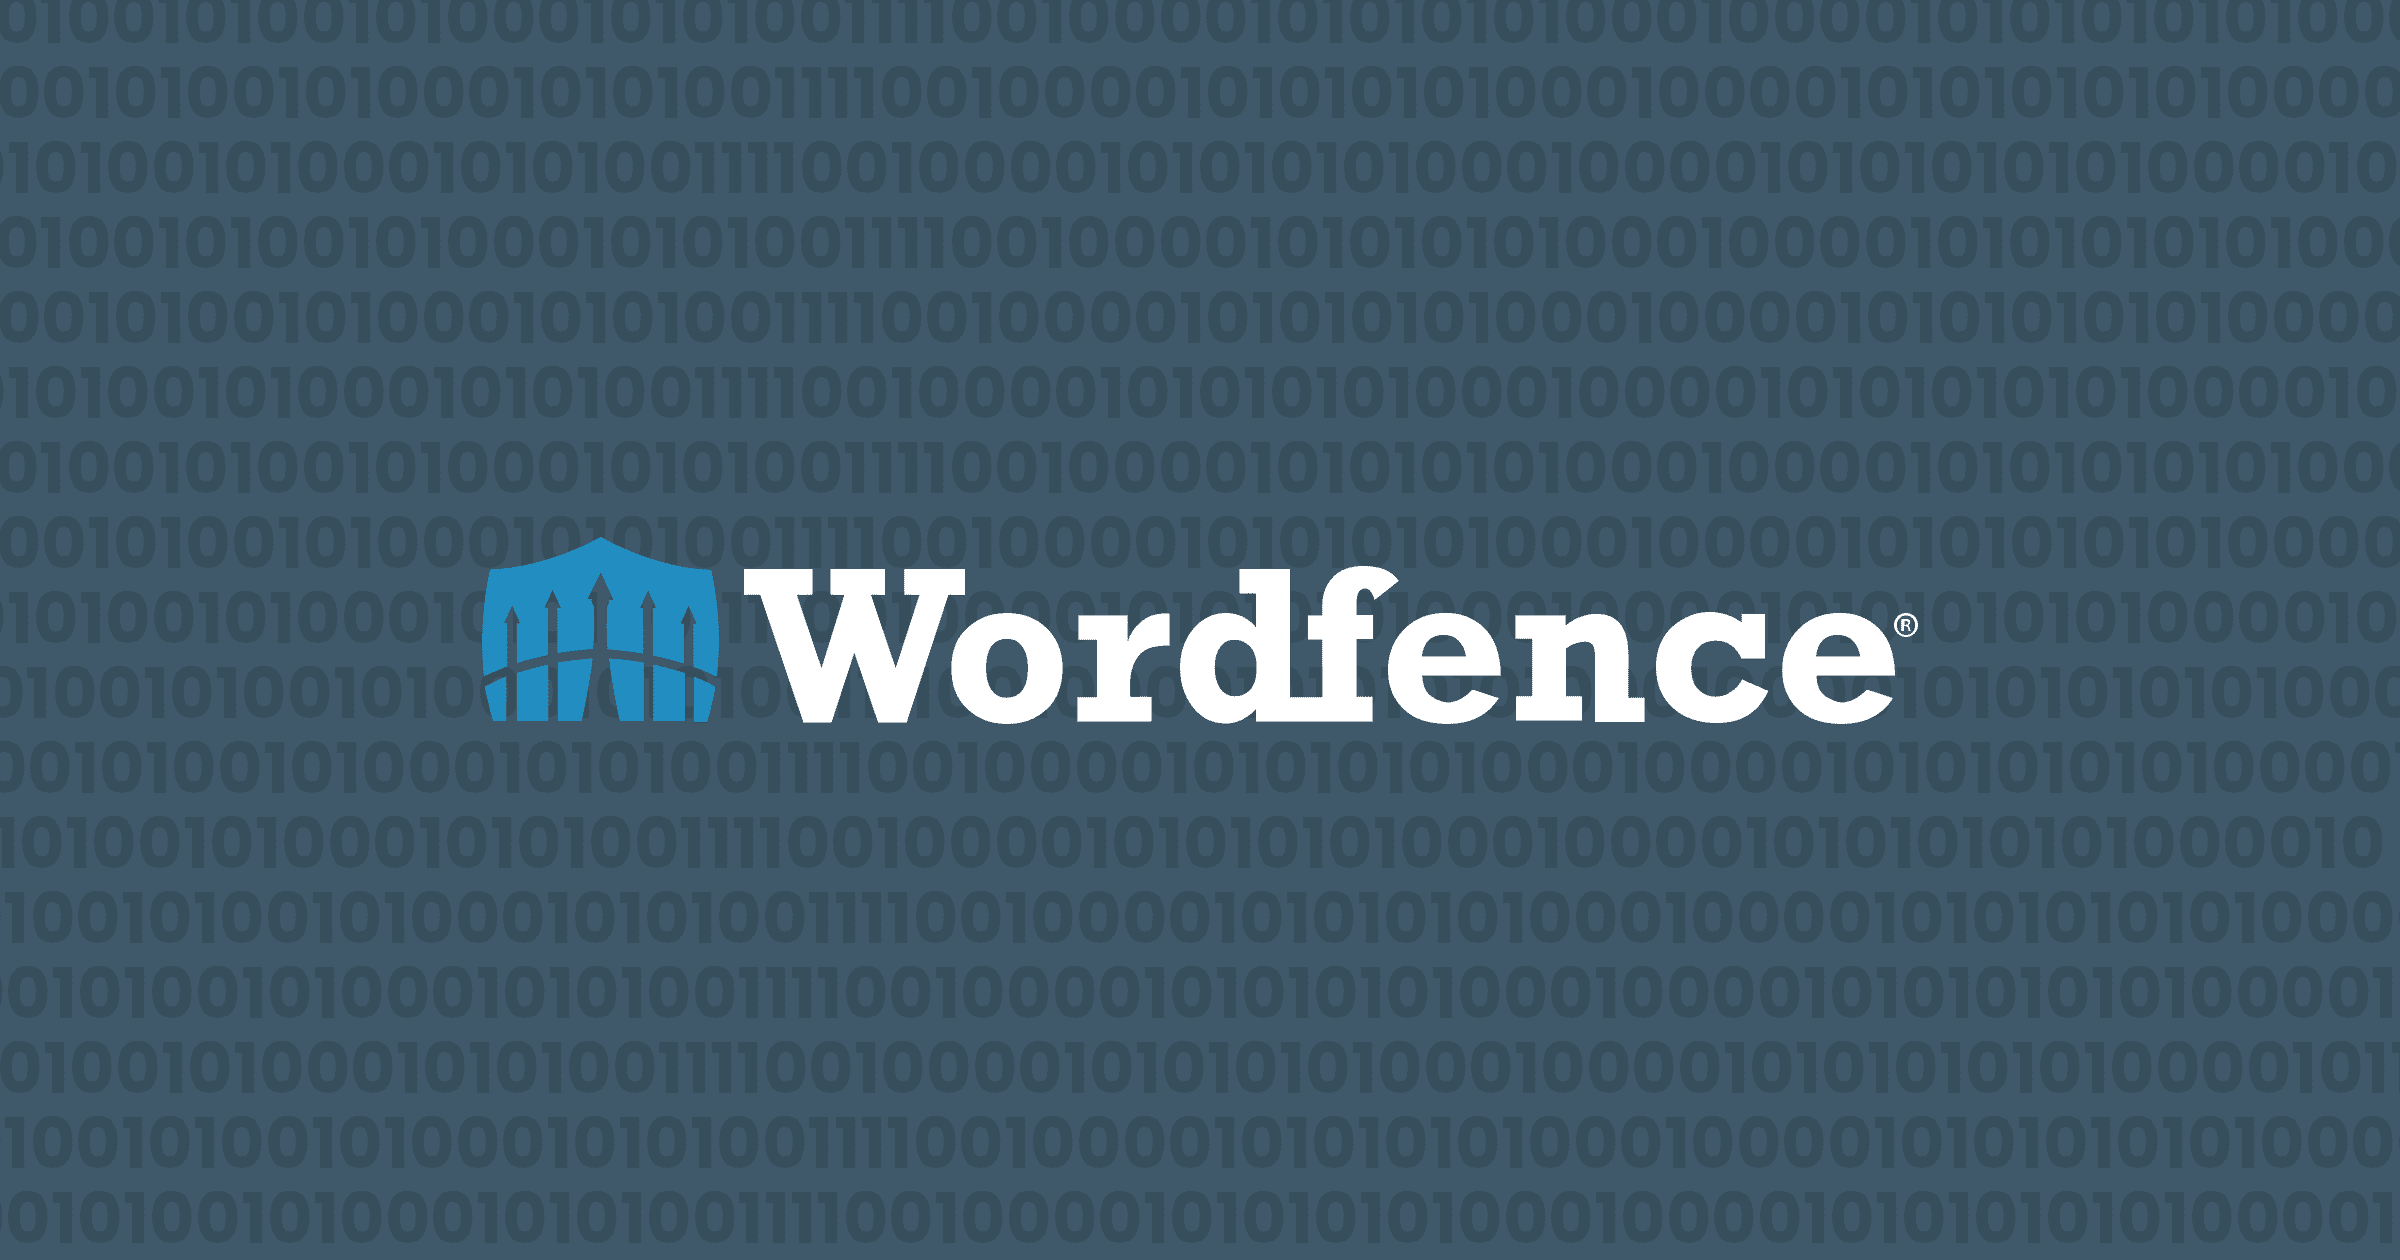 Making WordPress more secure with WordFence